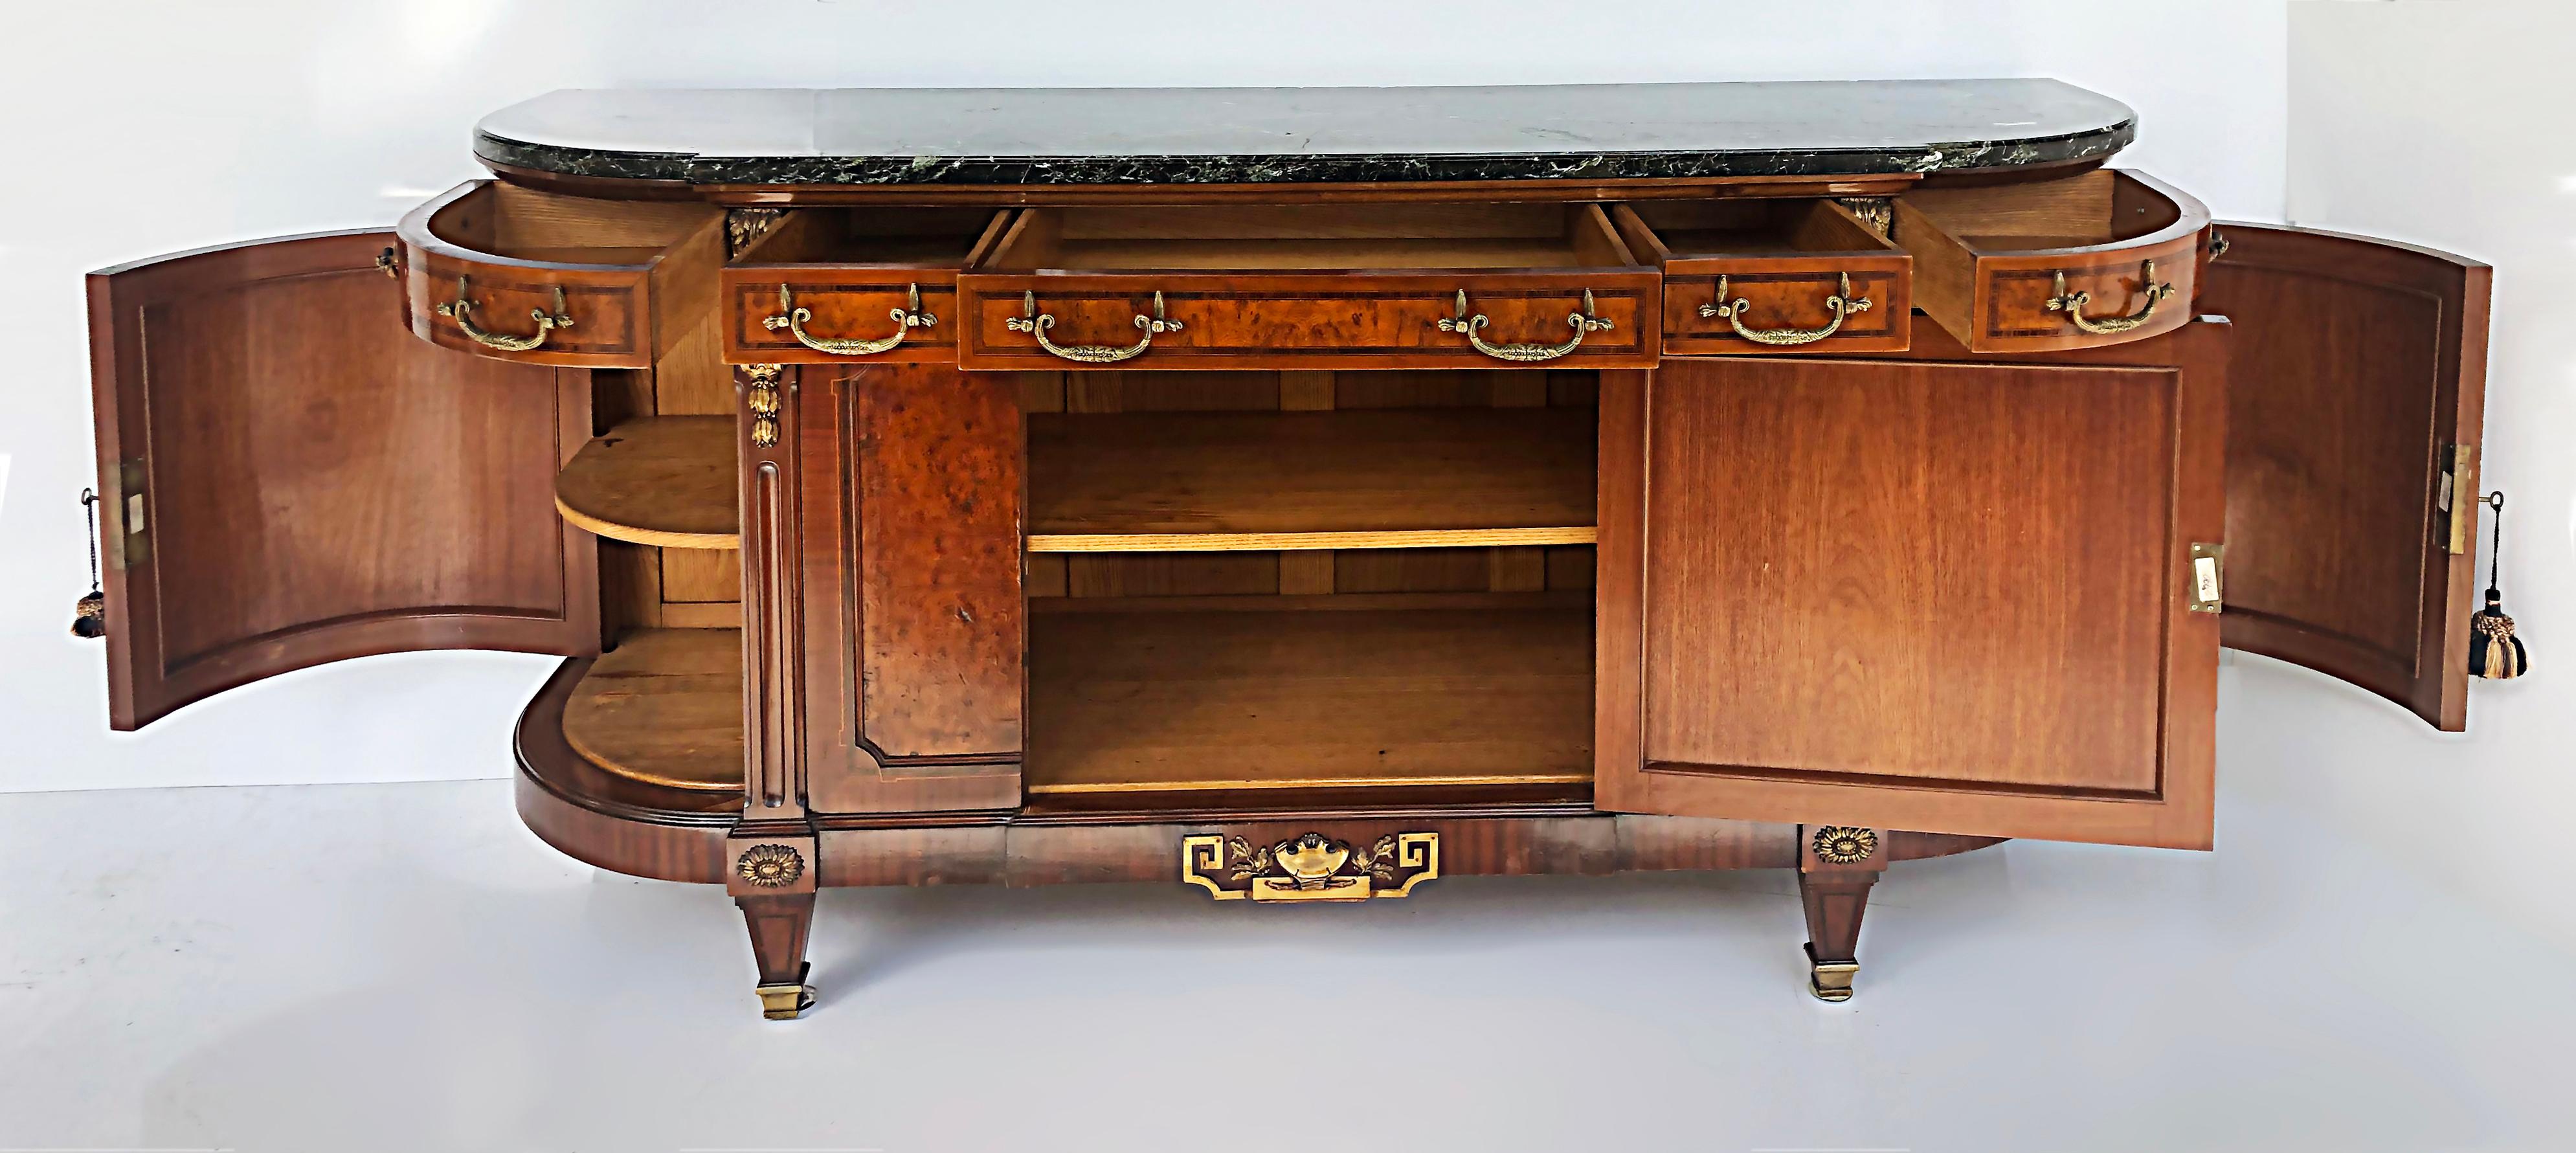 Empire Revival French Empire Neoclassical Burl Buffet, Marble, Gilt Bronze Mounts